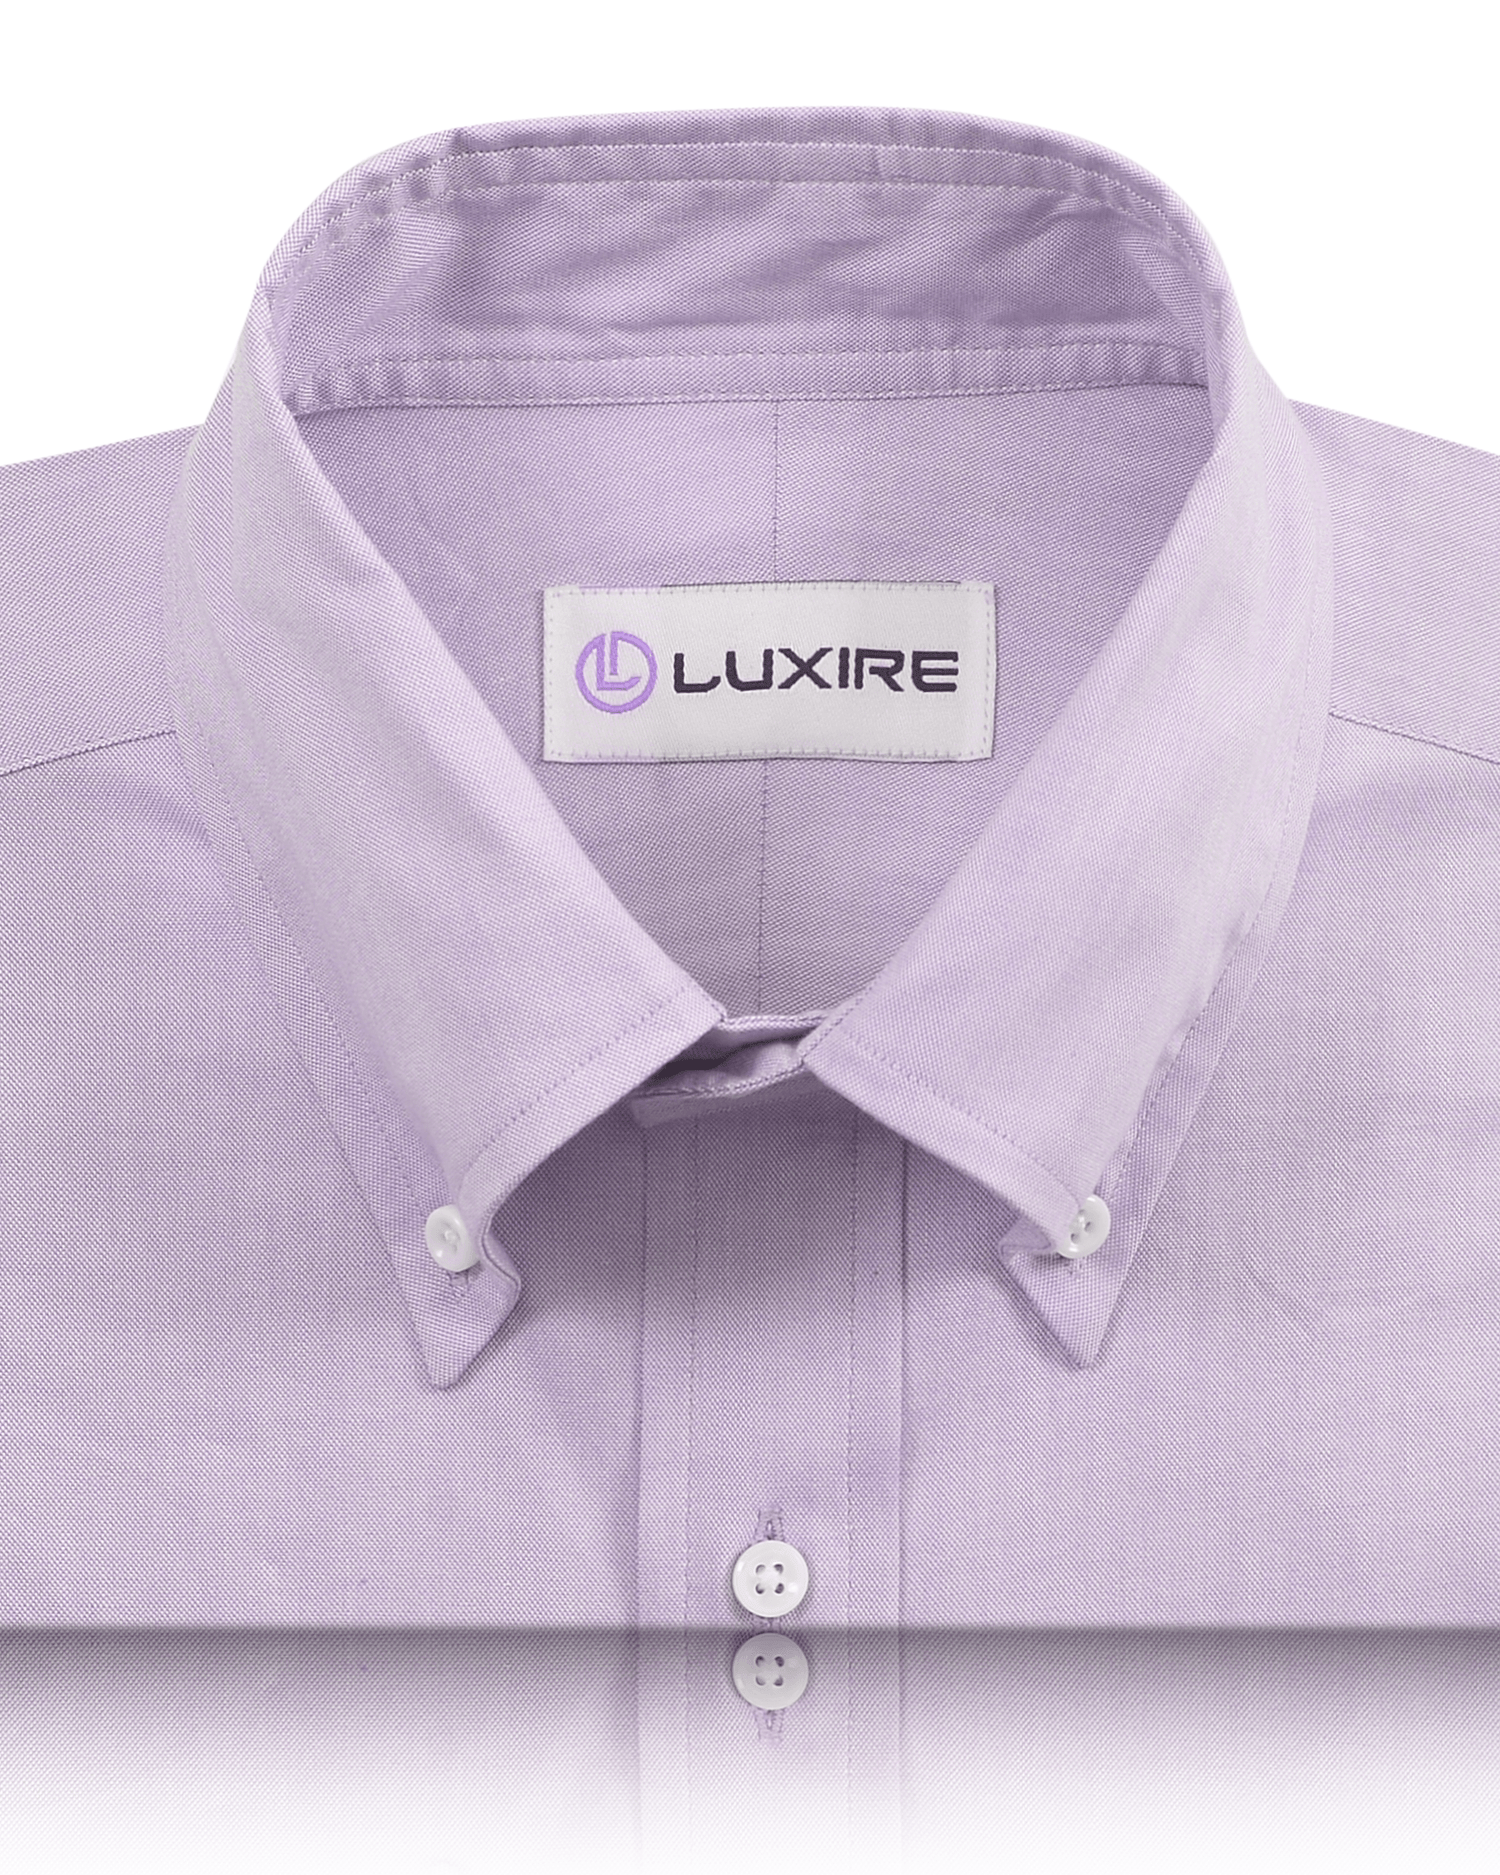 Collar of the custom oxford shirt for men by Luxire in lilac pinpoint